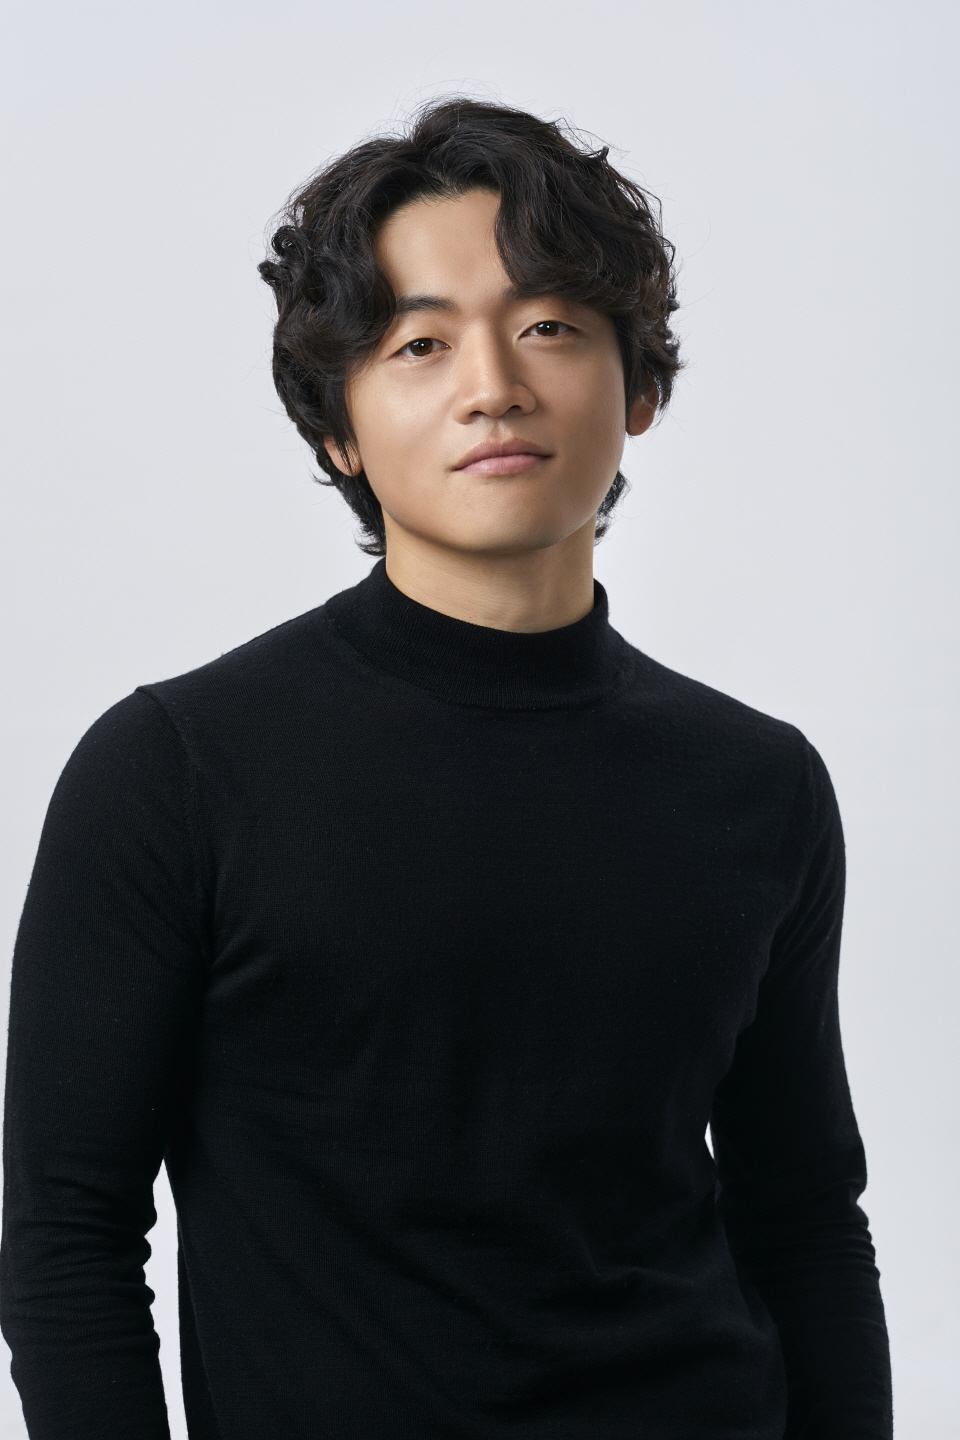 Actor zobok-rae has signed an exclusive contract with BH Entertainment.Zobok-rae, who has become a luxury Scene Stealer through the rich acting of crossing movies and dramas, has shown a big presence by playing a full-fledged role in Namok in MBC Imong which ended in July.He is expected to make another deep impression on the house theater as Yang Jong-yeol, a fourth-grade aide to Jang Tae-joon (Lee Jung-jae), who is about to be the first broadcast of JTBCs new monthly drama Aide: People Moving the World Season 2.BH Entertainment, which signed an exclusive contract with zobok-rae, has been awarded by Ko Soo, Gong Seung Yeon, Kim Go Eun, Kim Yong Ji, Park Sung Hoon, Park Jung Woo, Park Ji Hoo, Park Hae Soo, Gu, Chu Ja-hyun, Karata Erica, Han Gain, Han Ji-min, and Han Hyo-joo are actors management companies.BH Entertainment said, I am delighted to be with a zobok-rae actor with unlimited possibilities.I will continue to provide full support to communicate with the public through a number of works. He promised faith and support for zobok-rae.On the other hand, Advisor 2 starring zobok-rae will be available at JTBC at 9:30 pm on Monday, November 11th, following Chosun Hall of Fame.Photo = BH Entertainment